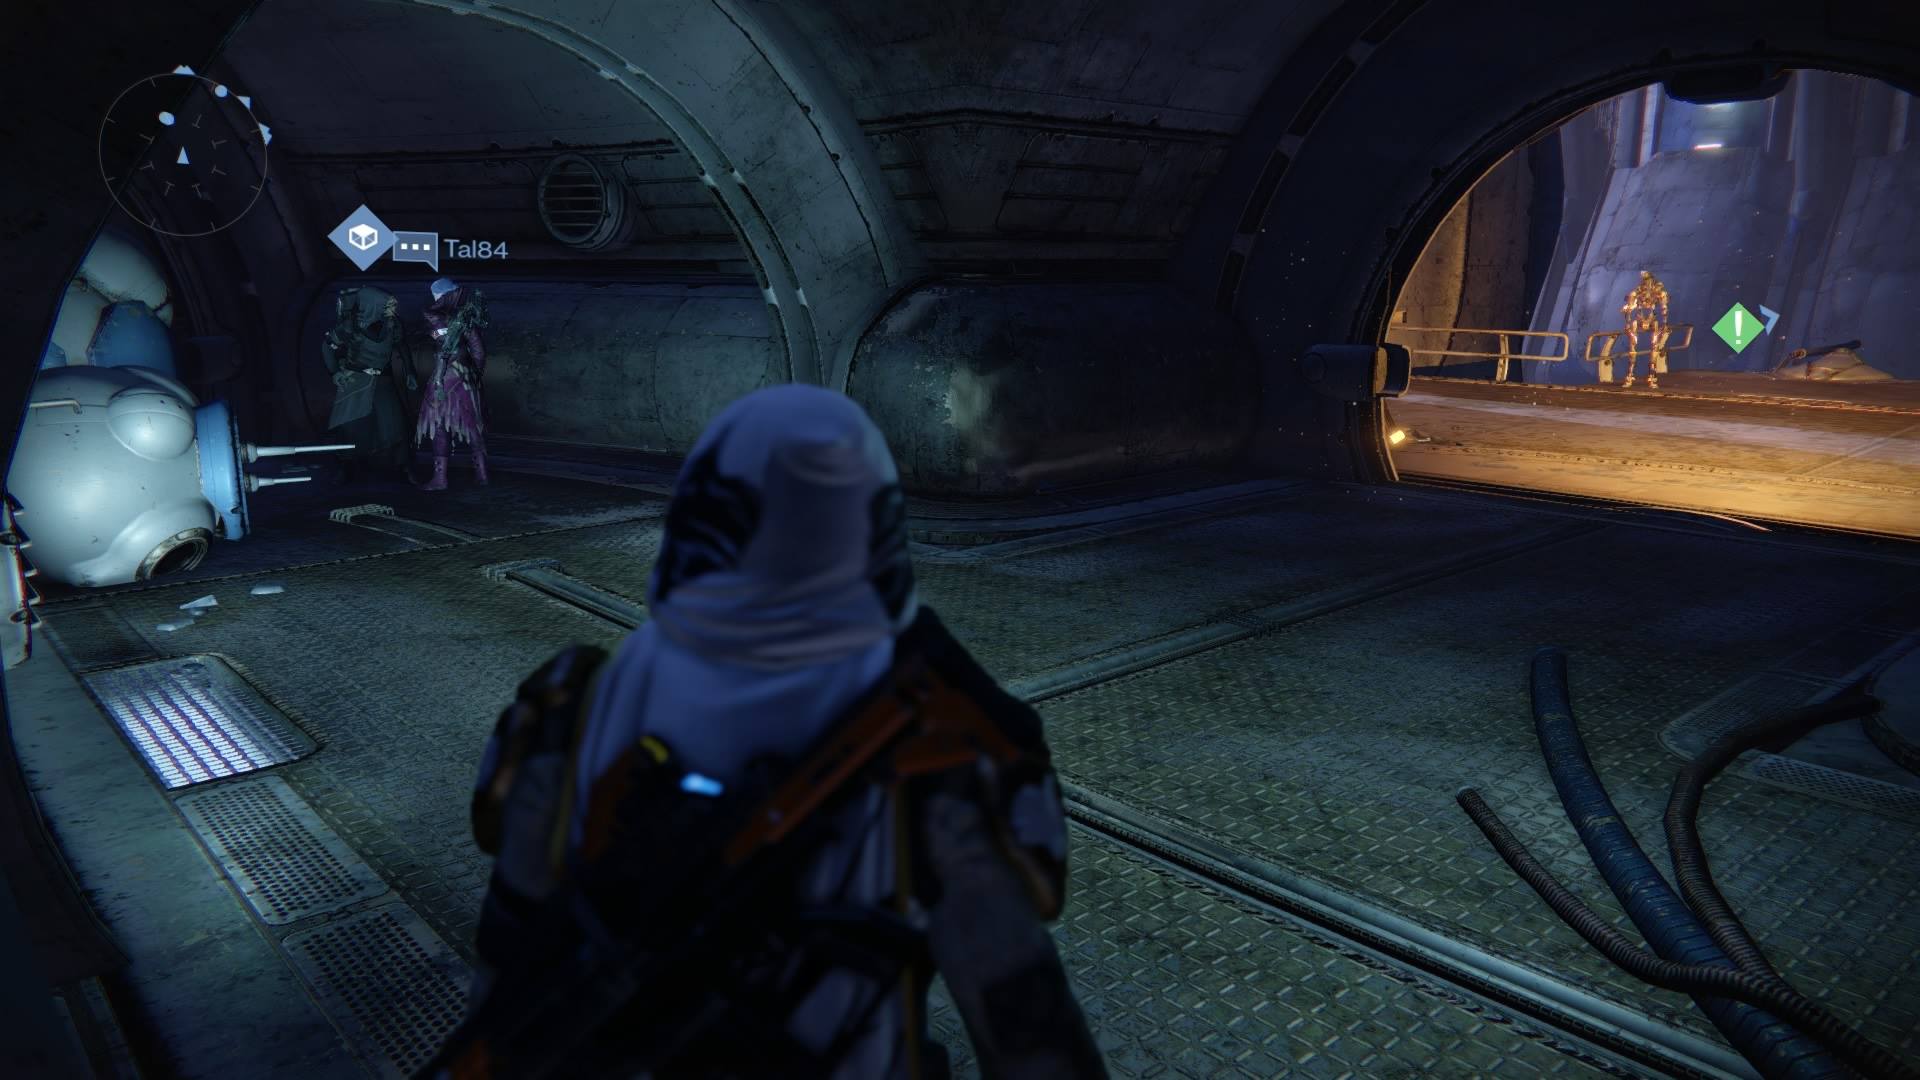 Xur's Location - The Reef, down the walkway next to the Bounty Tracker